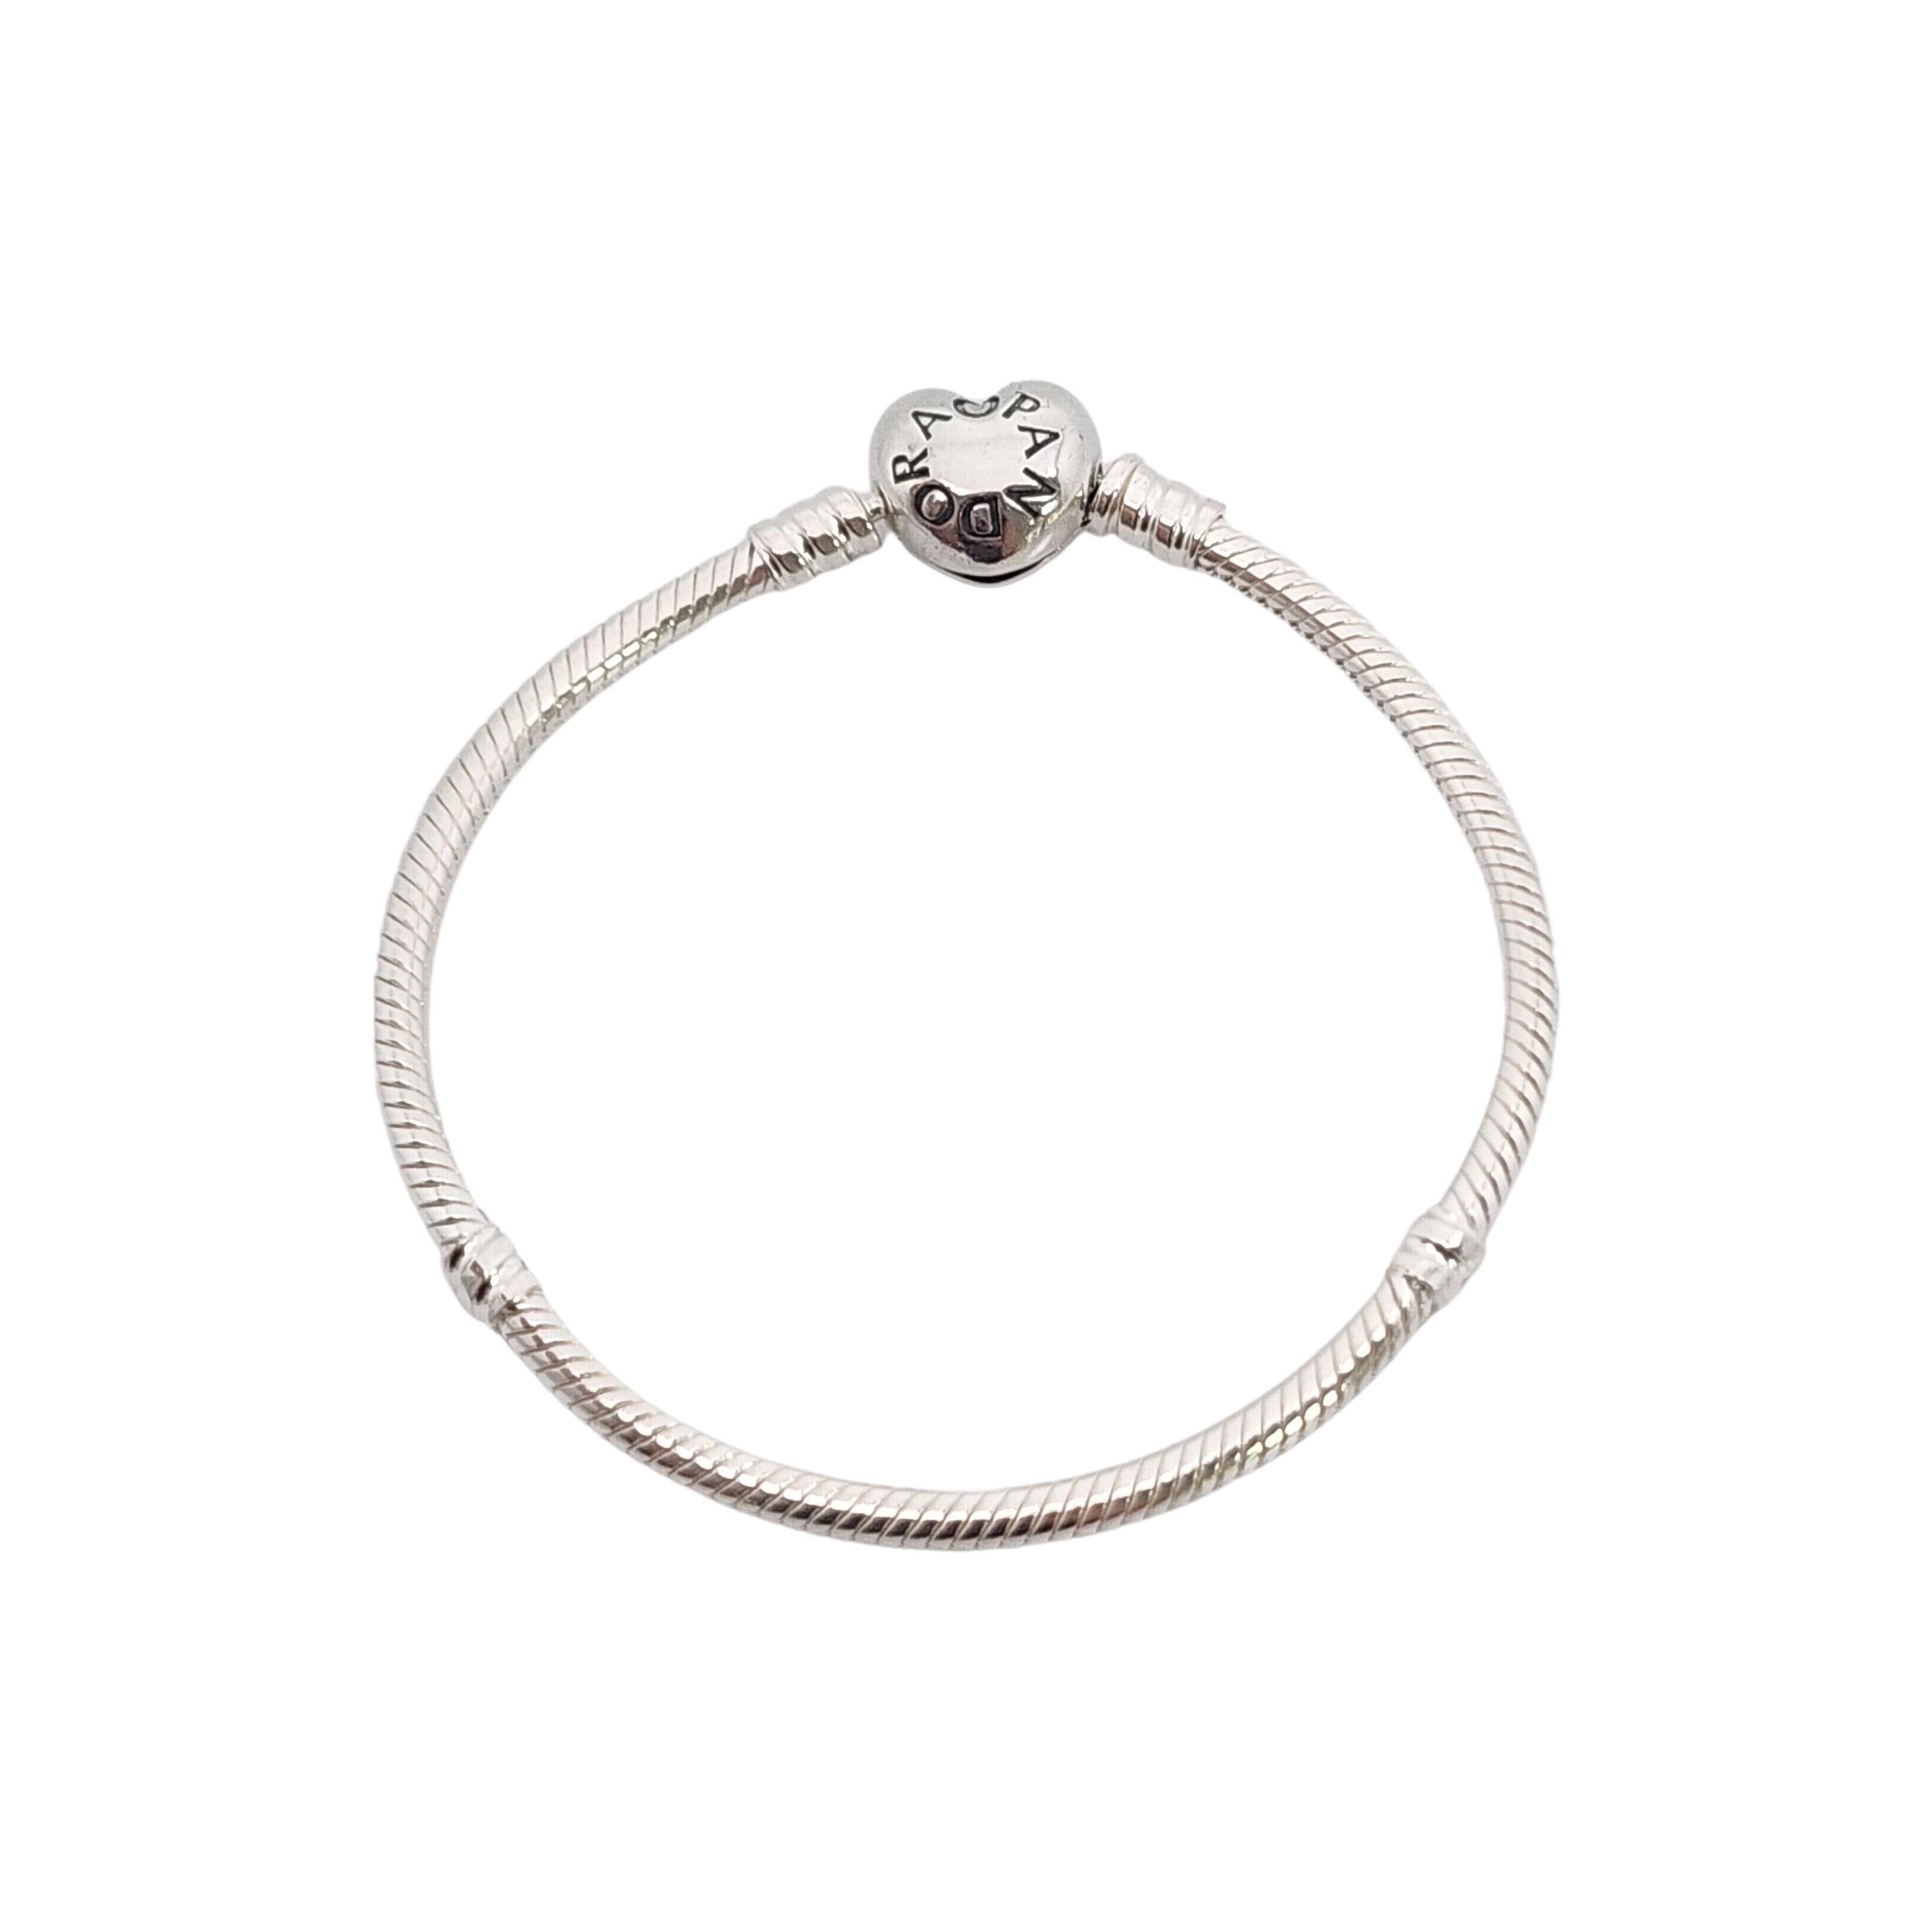 Authentic Pandora Moments Sterling Silver Heart Clasp Snake Chain Bracelet with box.

#590719-17

Pandora's iconic snake chain bracelet featuring a heart clasp  featuring Pandora on one side, Crown O monogram on the other. Includes original plastic